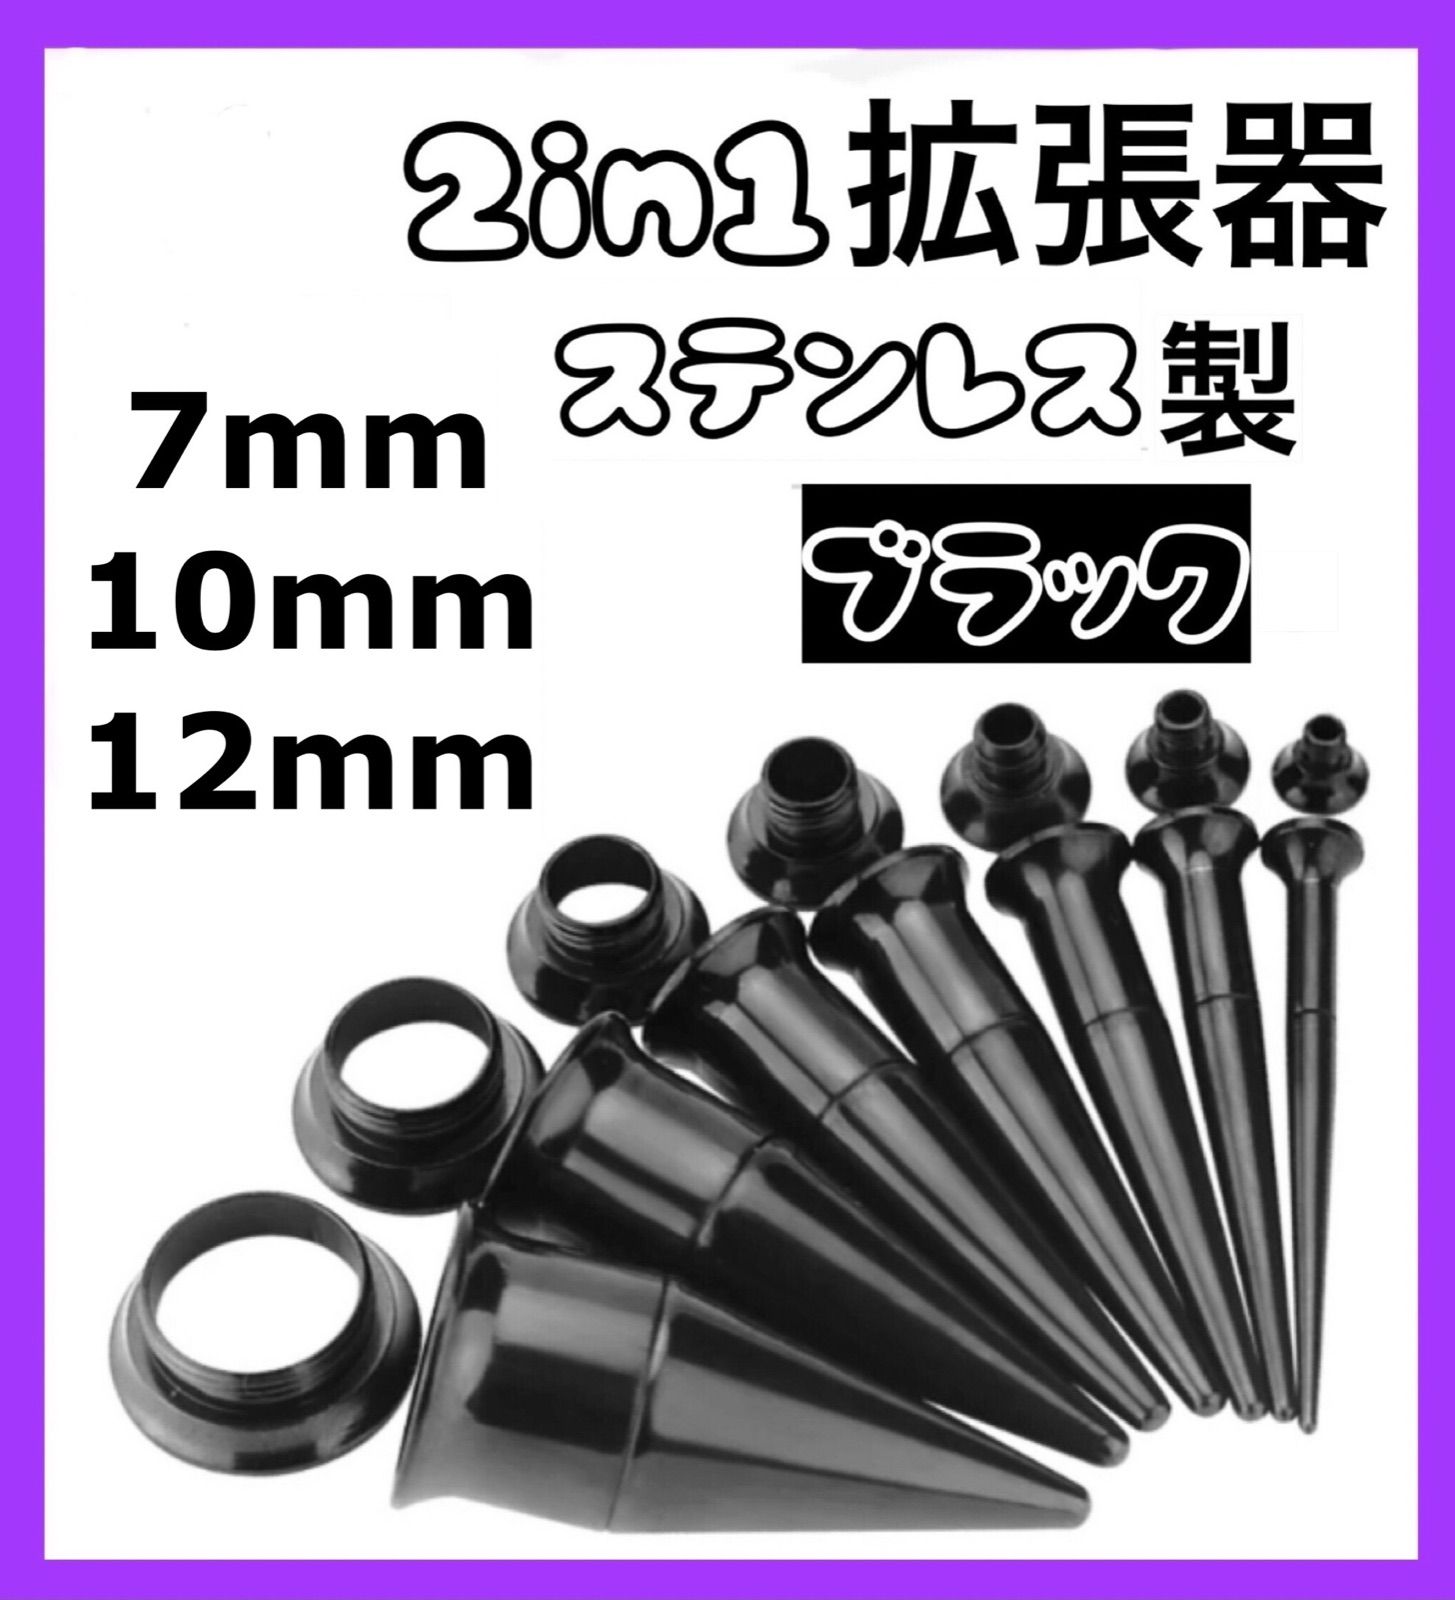 98%OFF!】 ボディピアス 2in1 拡張器 13mm 14mm 12mm ダブルフレア